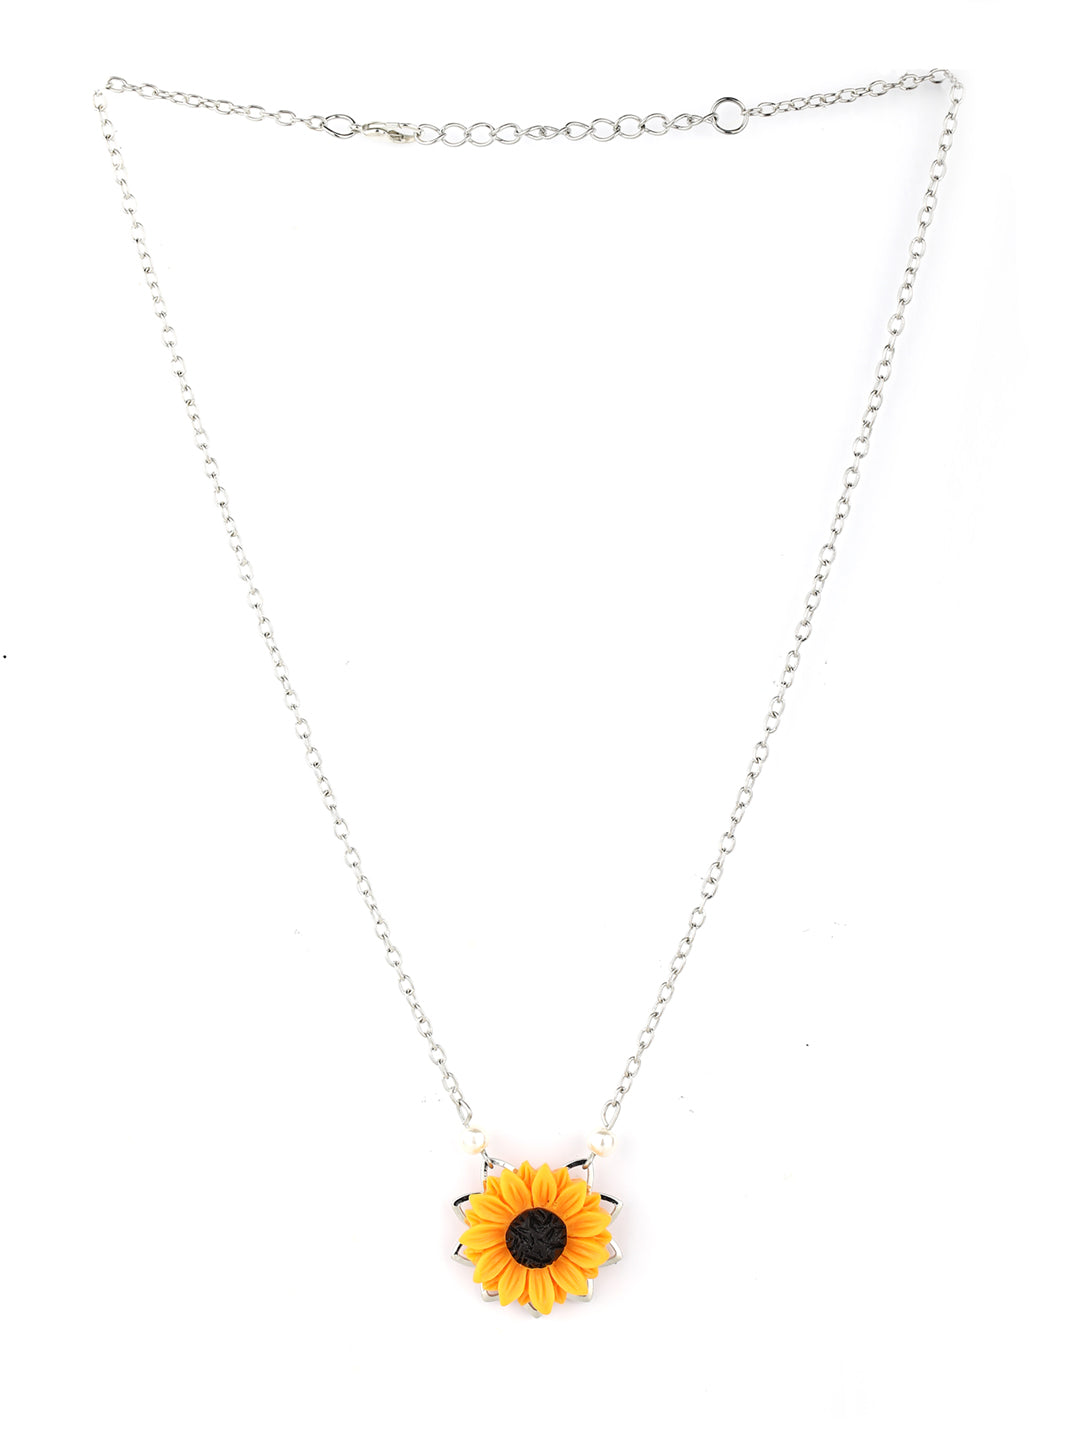 Silver Plated Sunflower Pendant Necklace - NOZ2TOZ